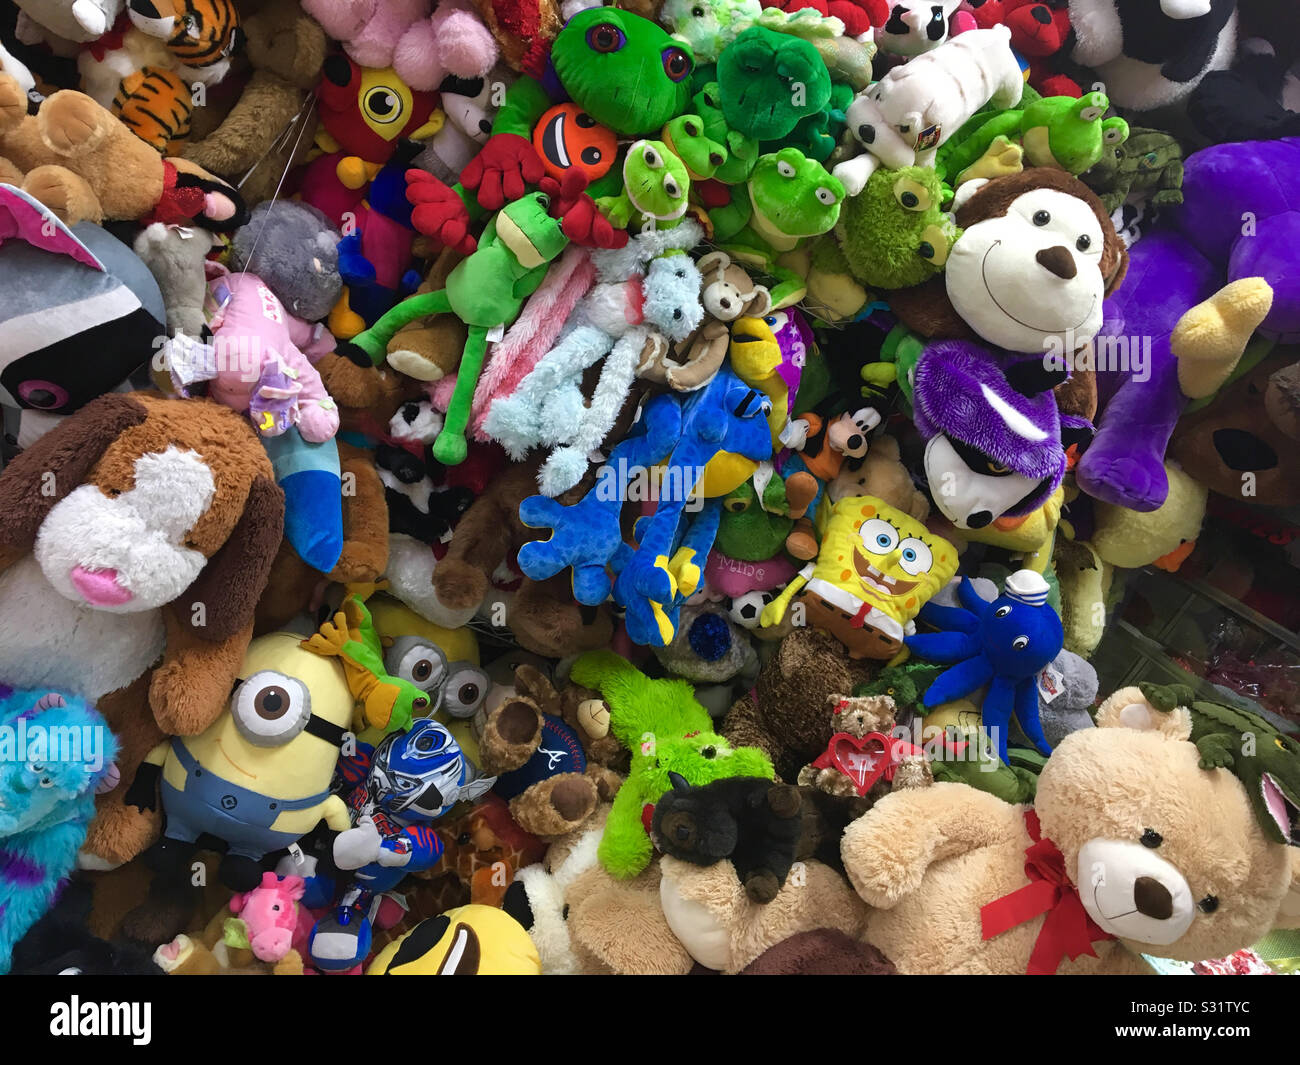 https://c8.alamy.com/comp/S31TYC/collection-of-various-stuffed-animals-and-characters-on-display-S31TYC.jpg